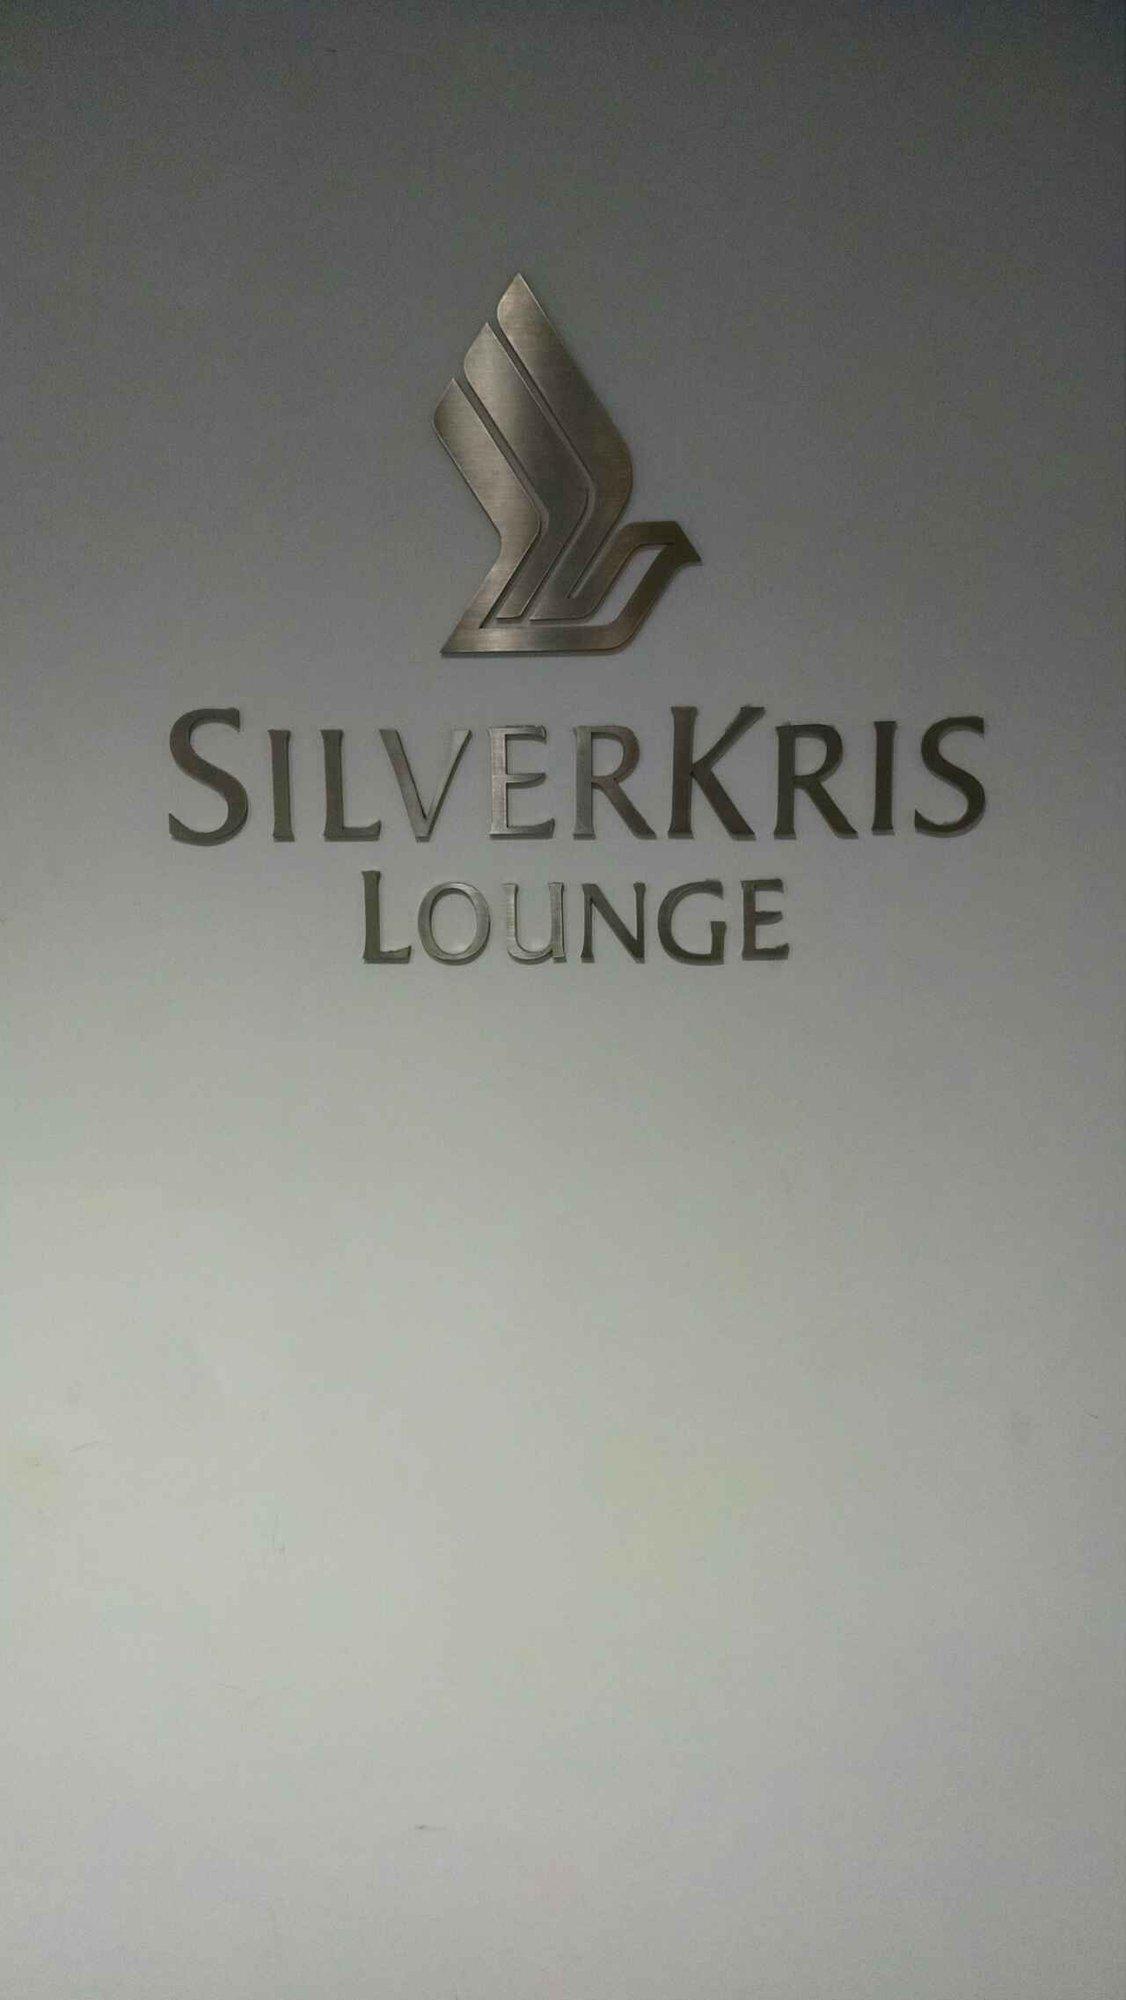 Singapore Airlines SilverKris Business Class Lounge image 7 of 7